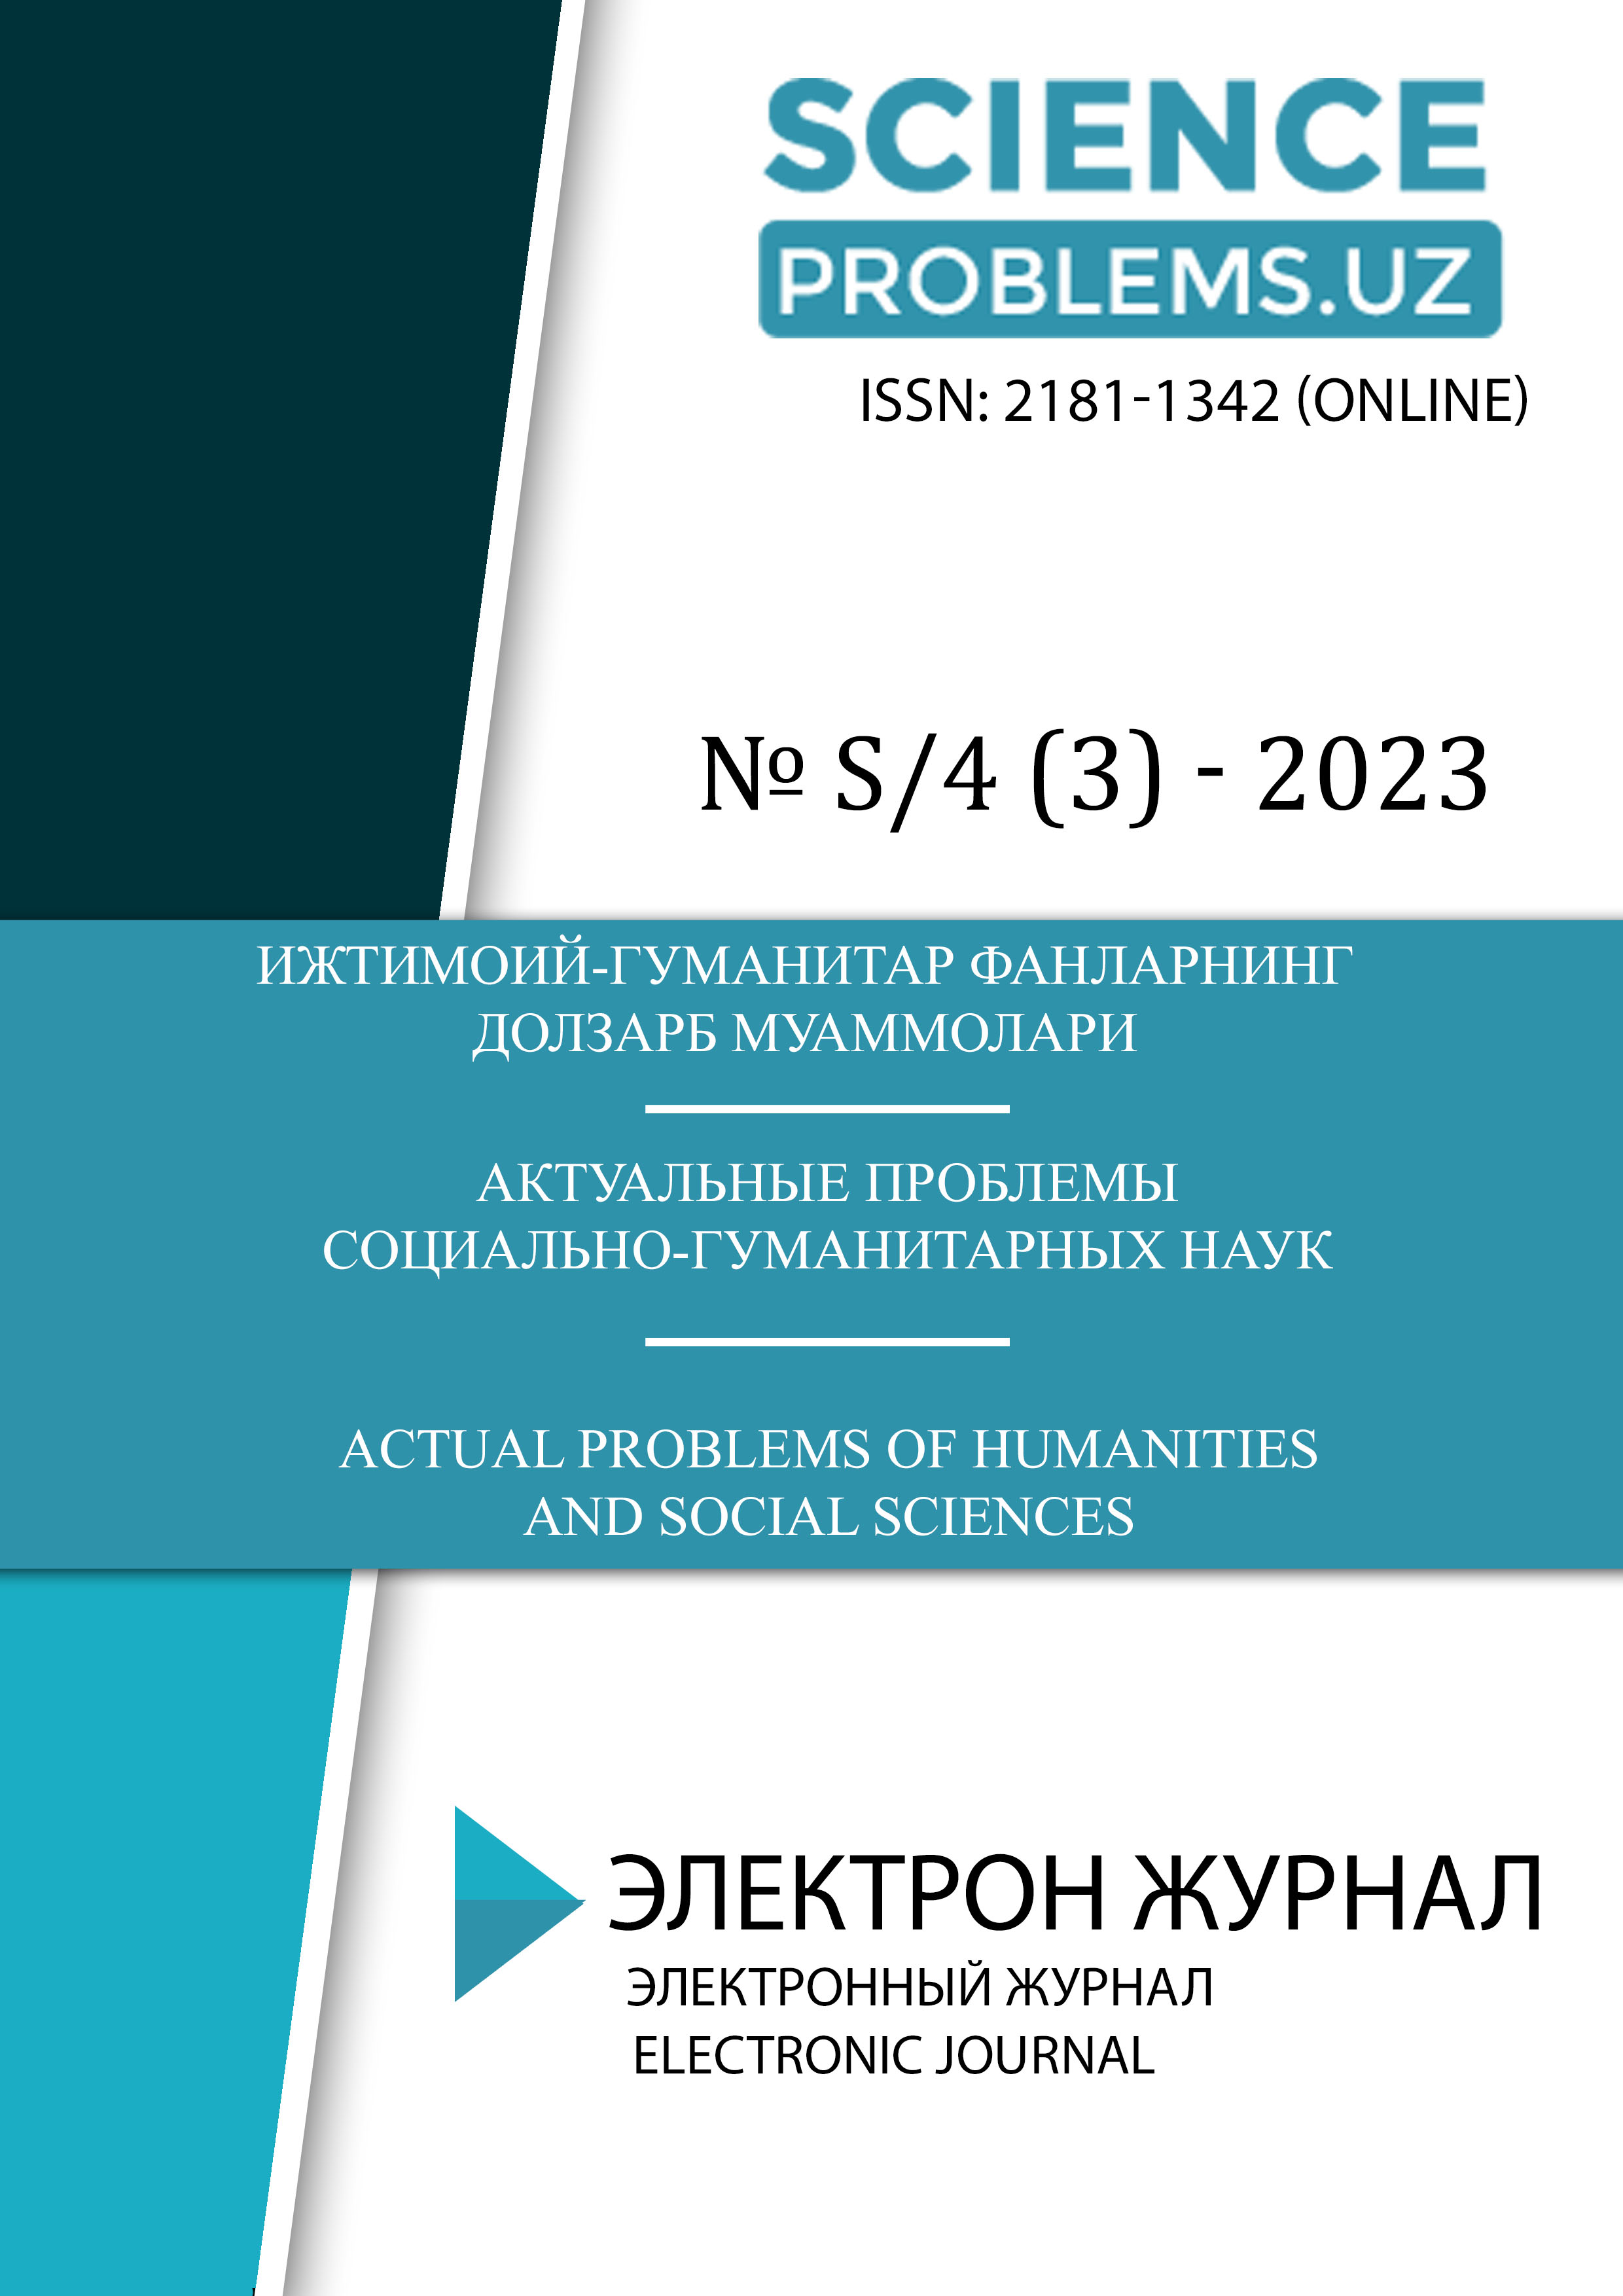 					View Vol. 3 No. S/4 (2023): ACTUAL PROBLEMS OF HUMANITIES AND SOCIAL SCIENCES
				